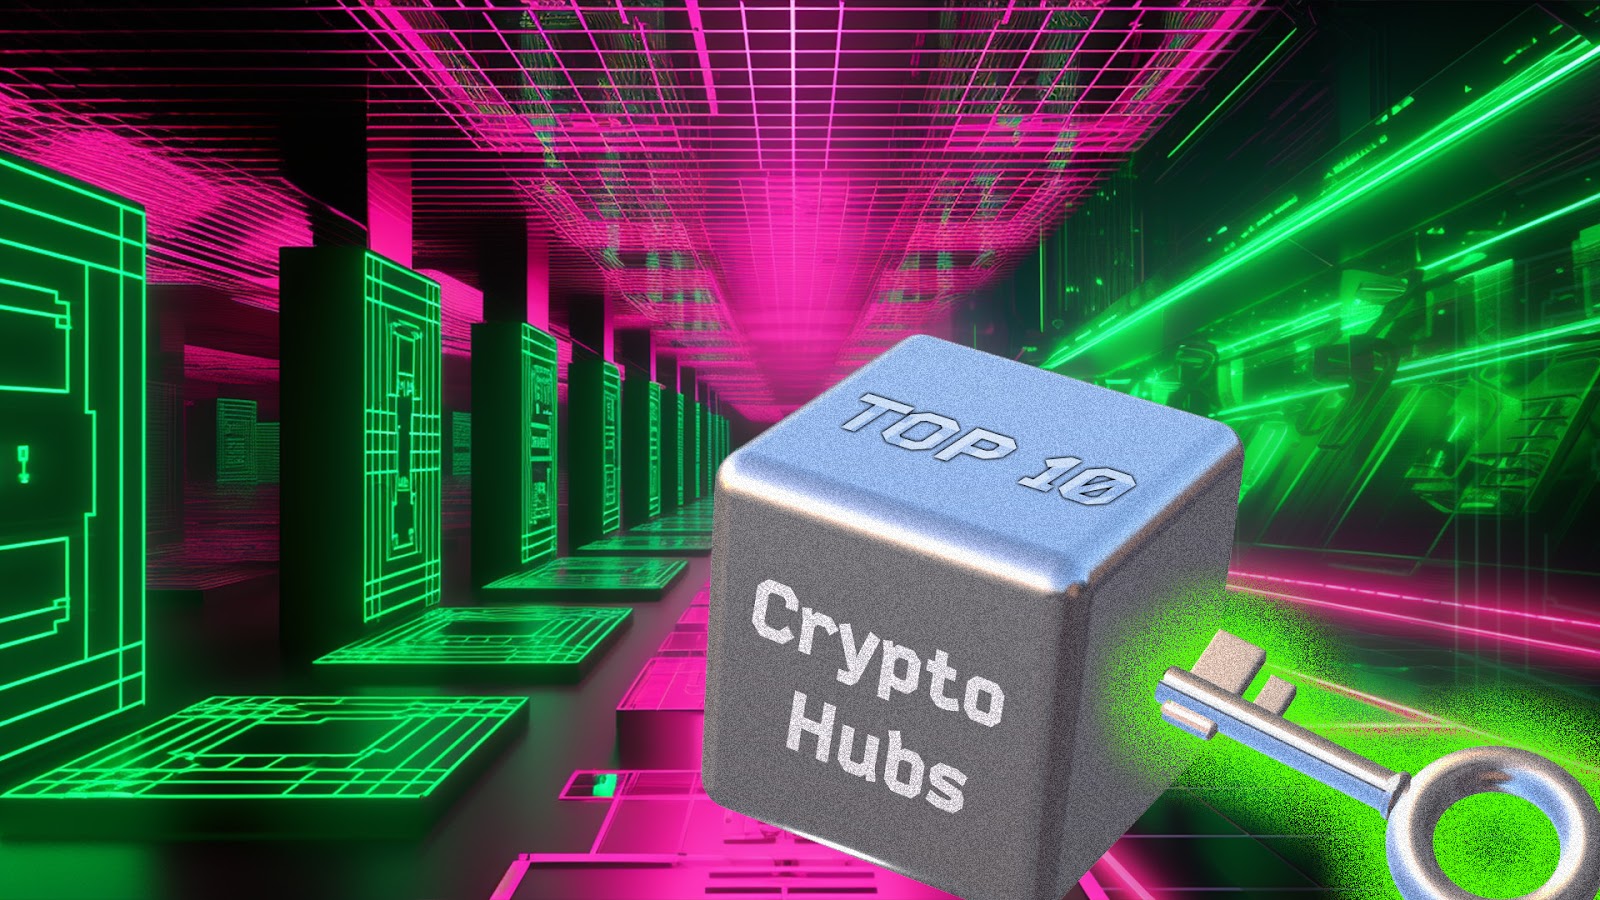 Revealing the World’s Top 10 Crypto Hubs